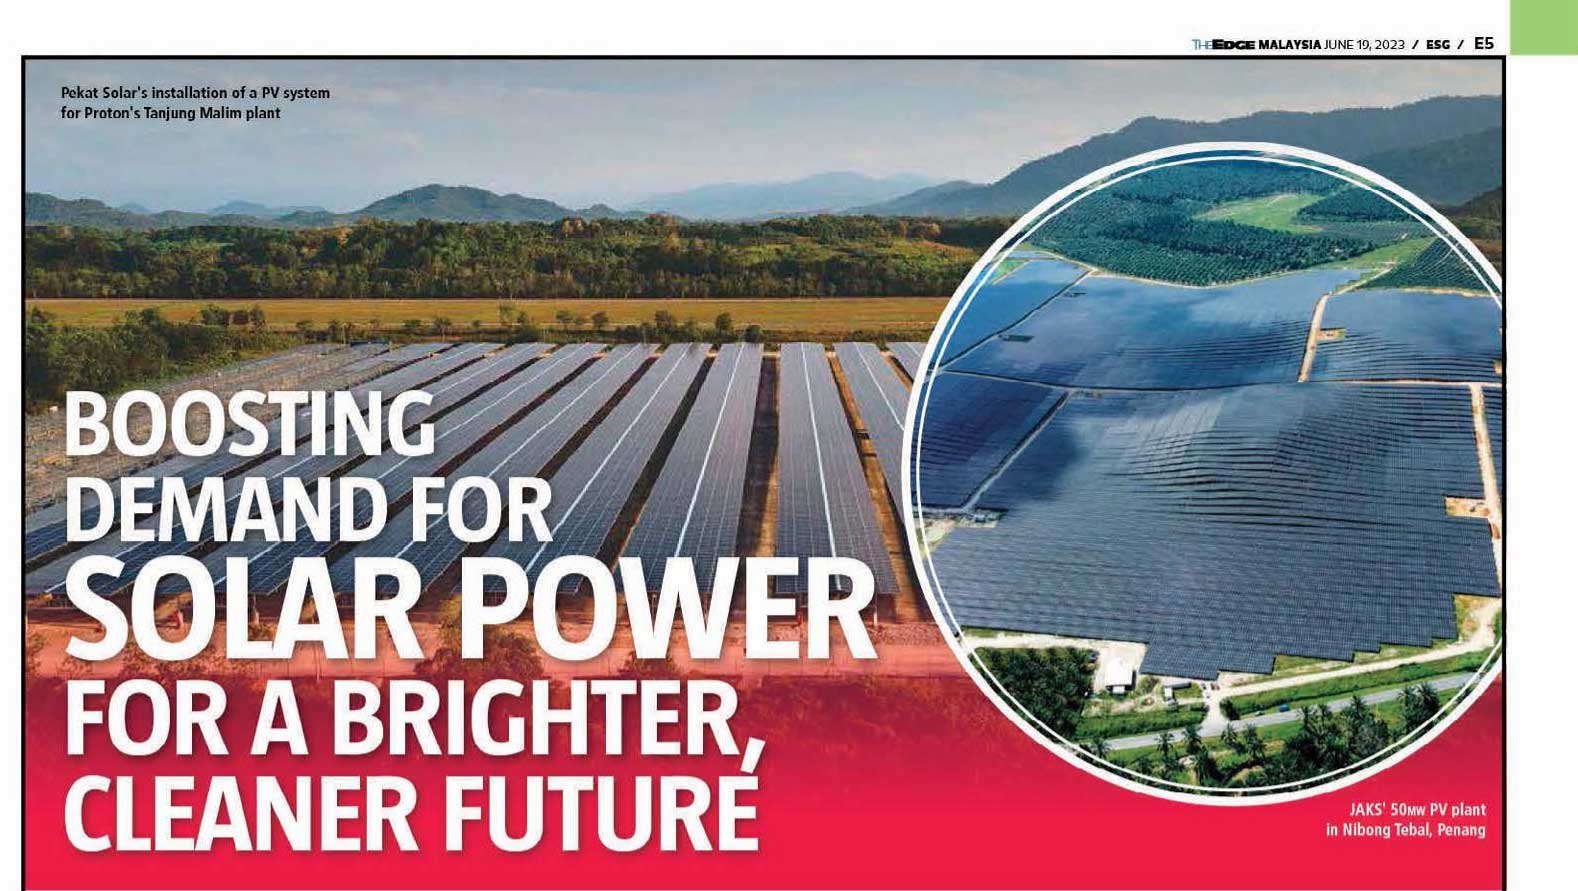 Boosting Demand for Solar Power for a Brighter, Cleaner Future